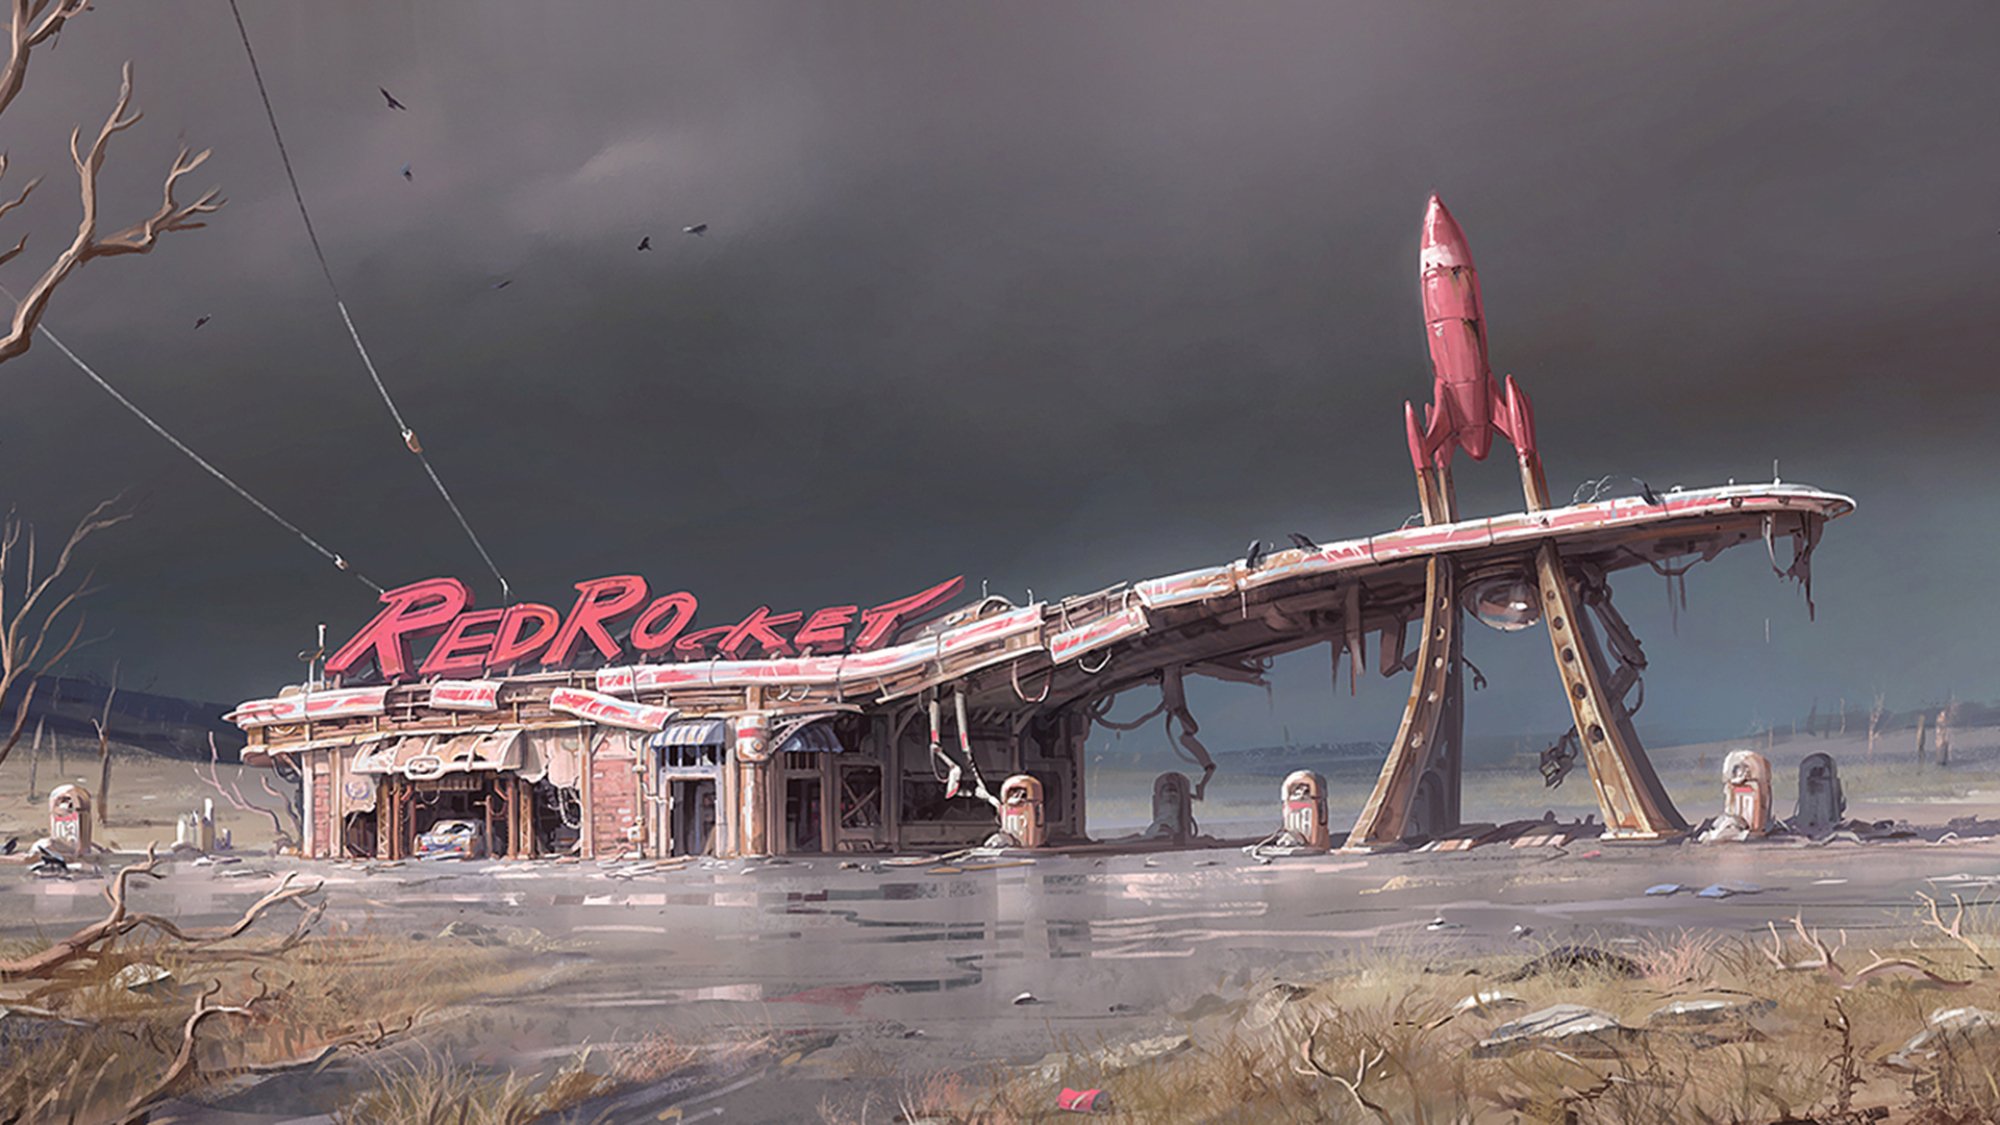 A rendering of the Red Rocket gas station from the game "Fallout 4".